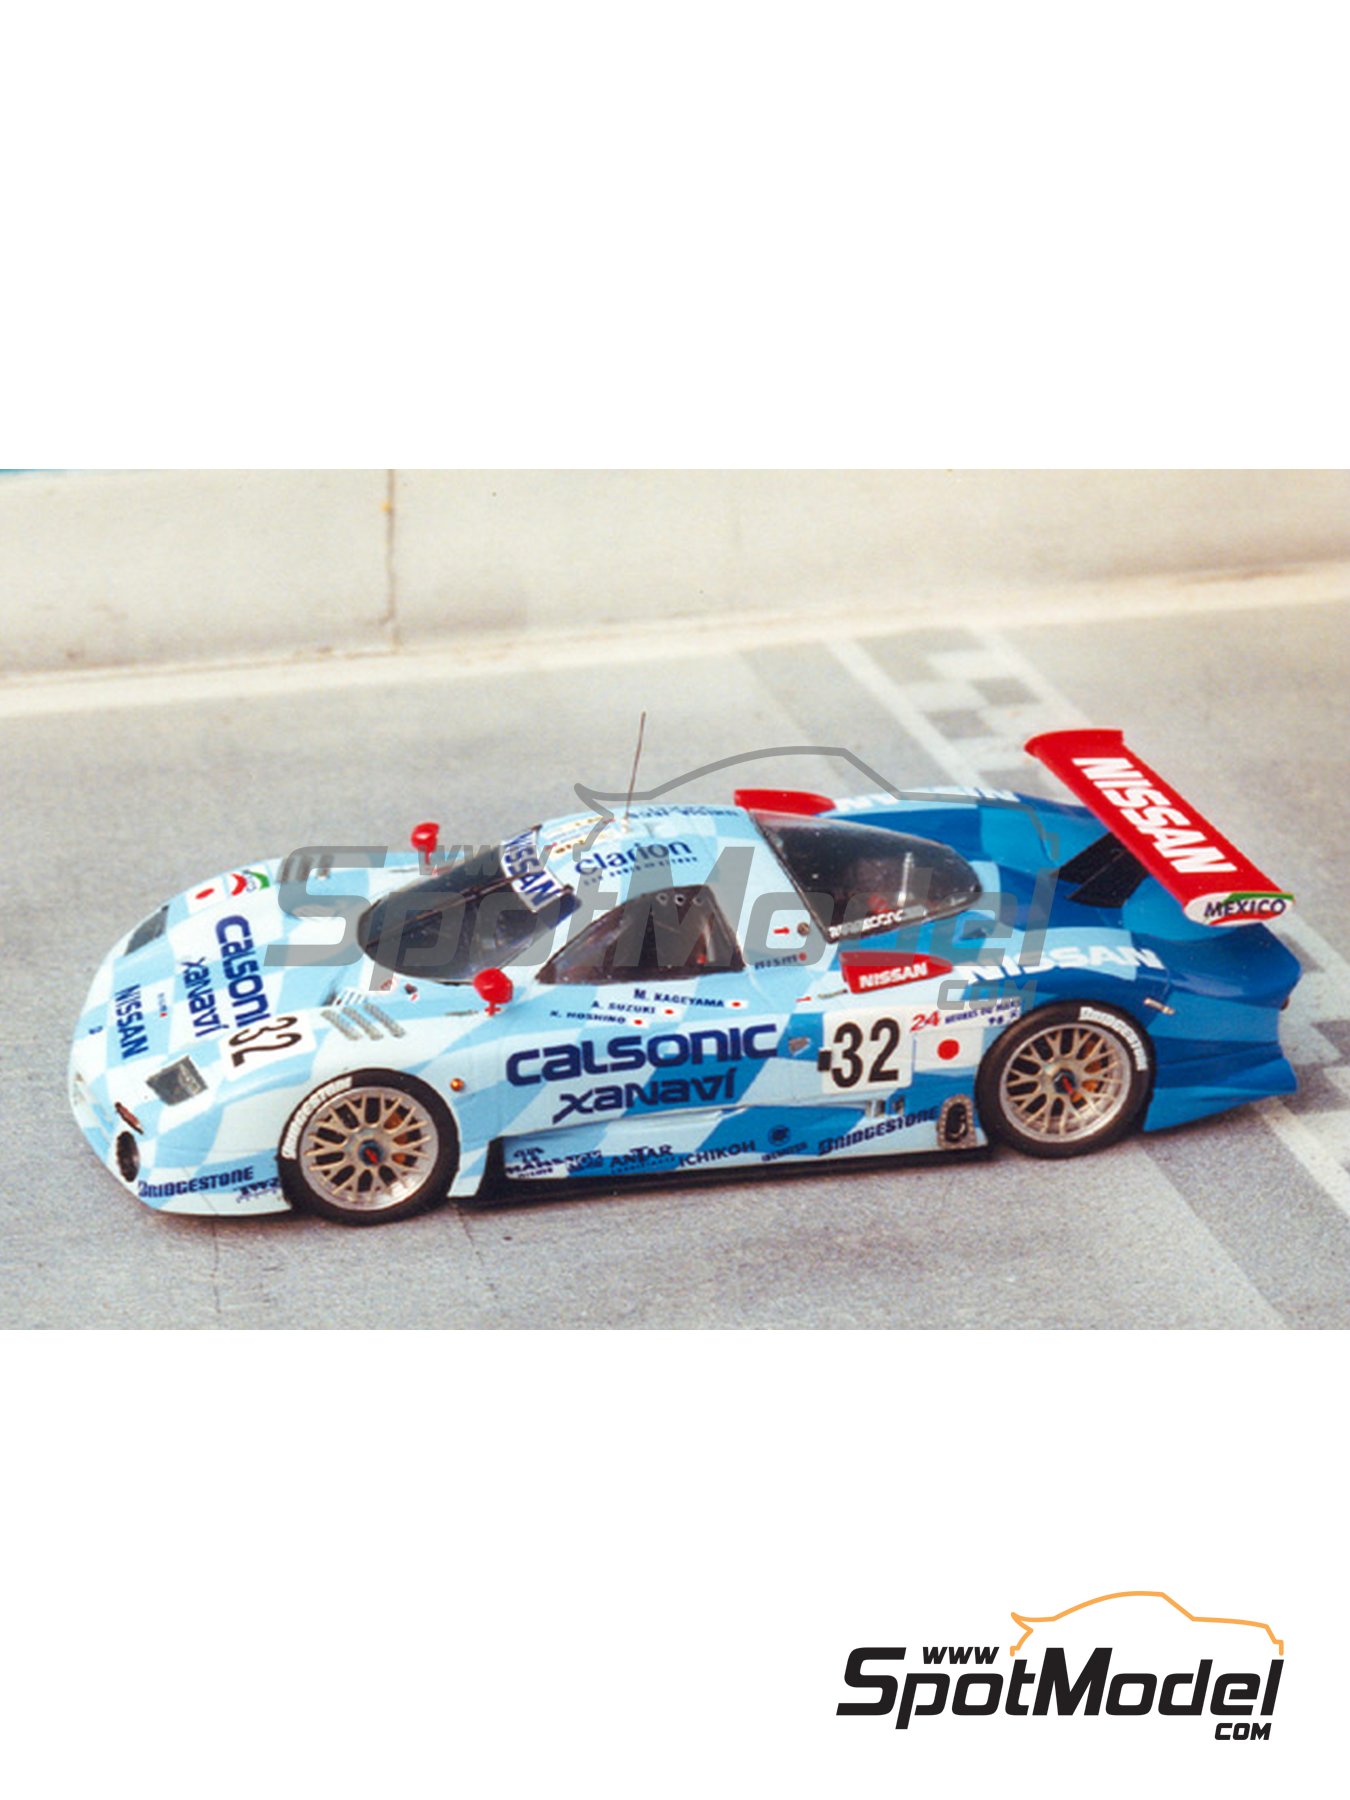 Nissan R390 GT1 sponsored by Clarion - 24 Hours Le Mans 1998. Car scale  model kit in 1/43 scale manufactured by Renaissance Models (ref. 038B)